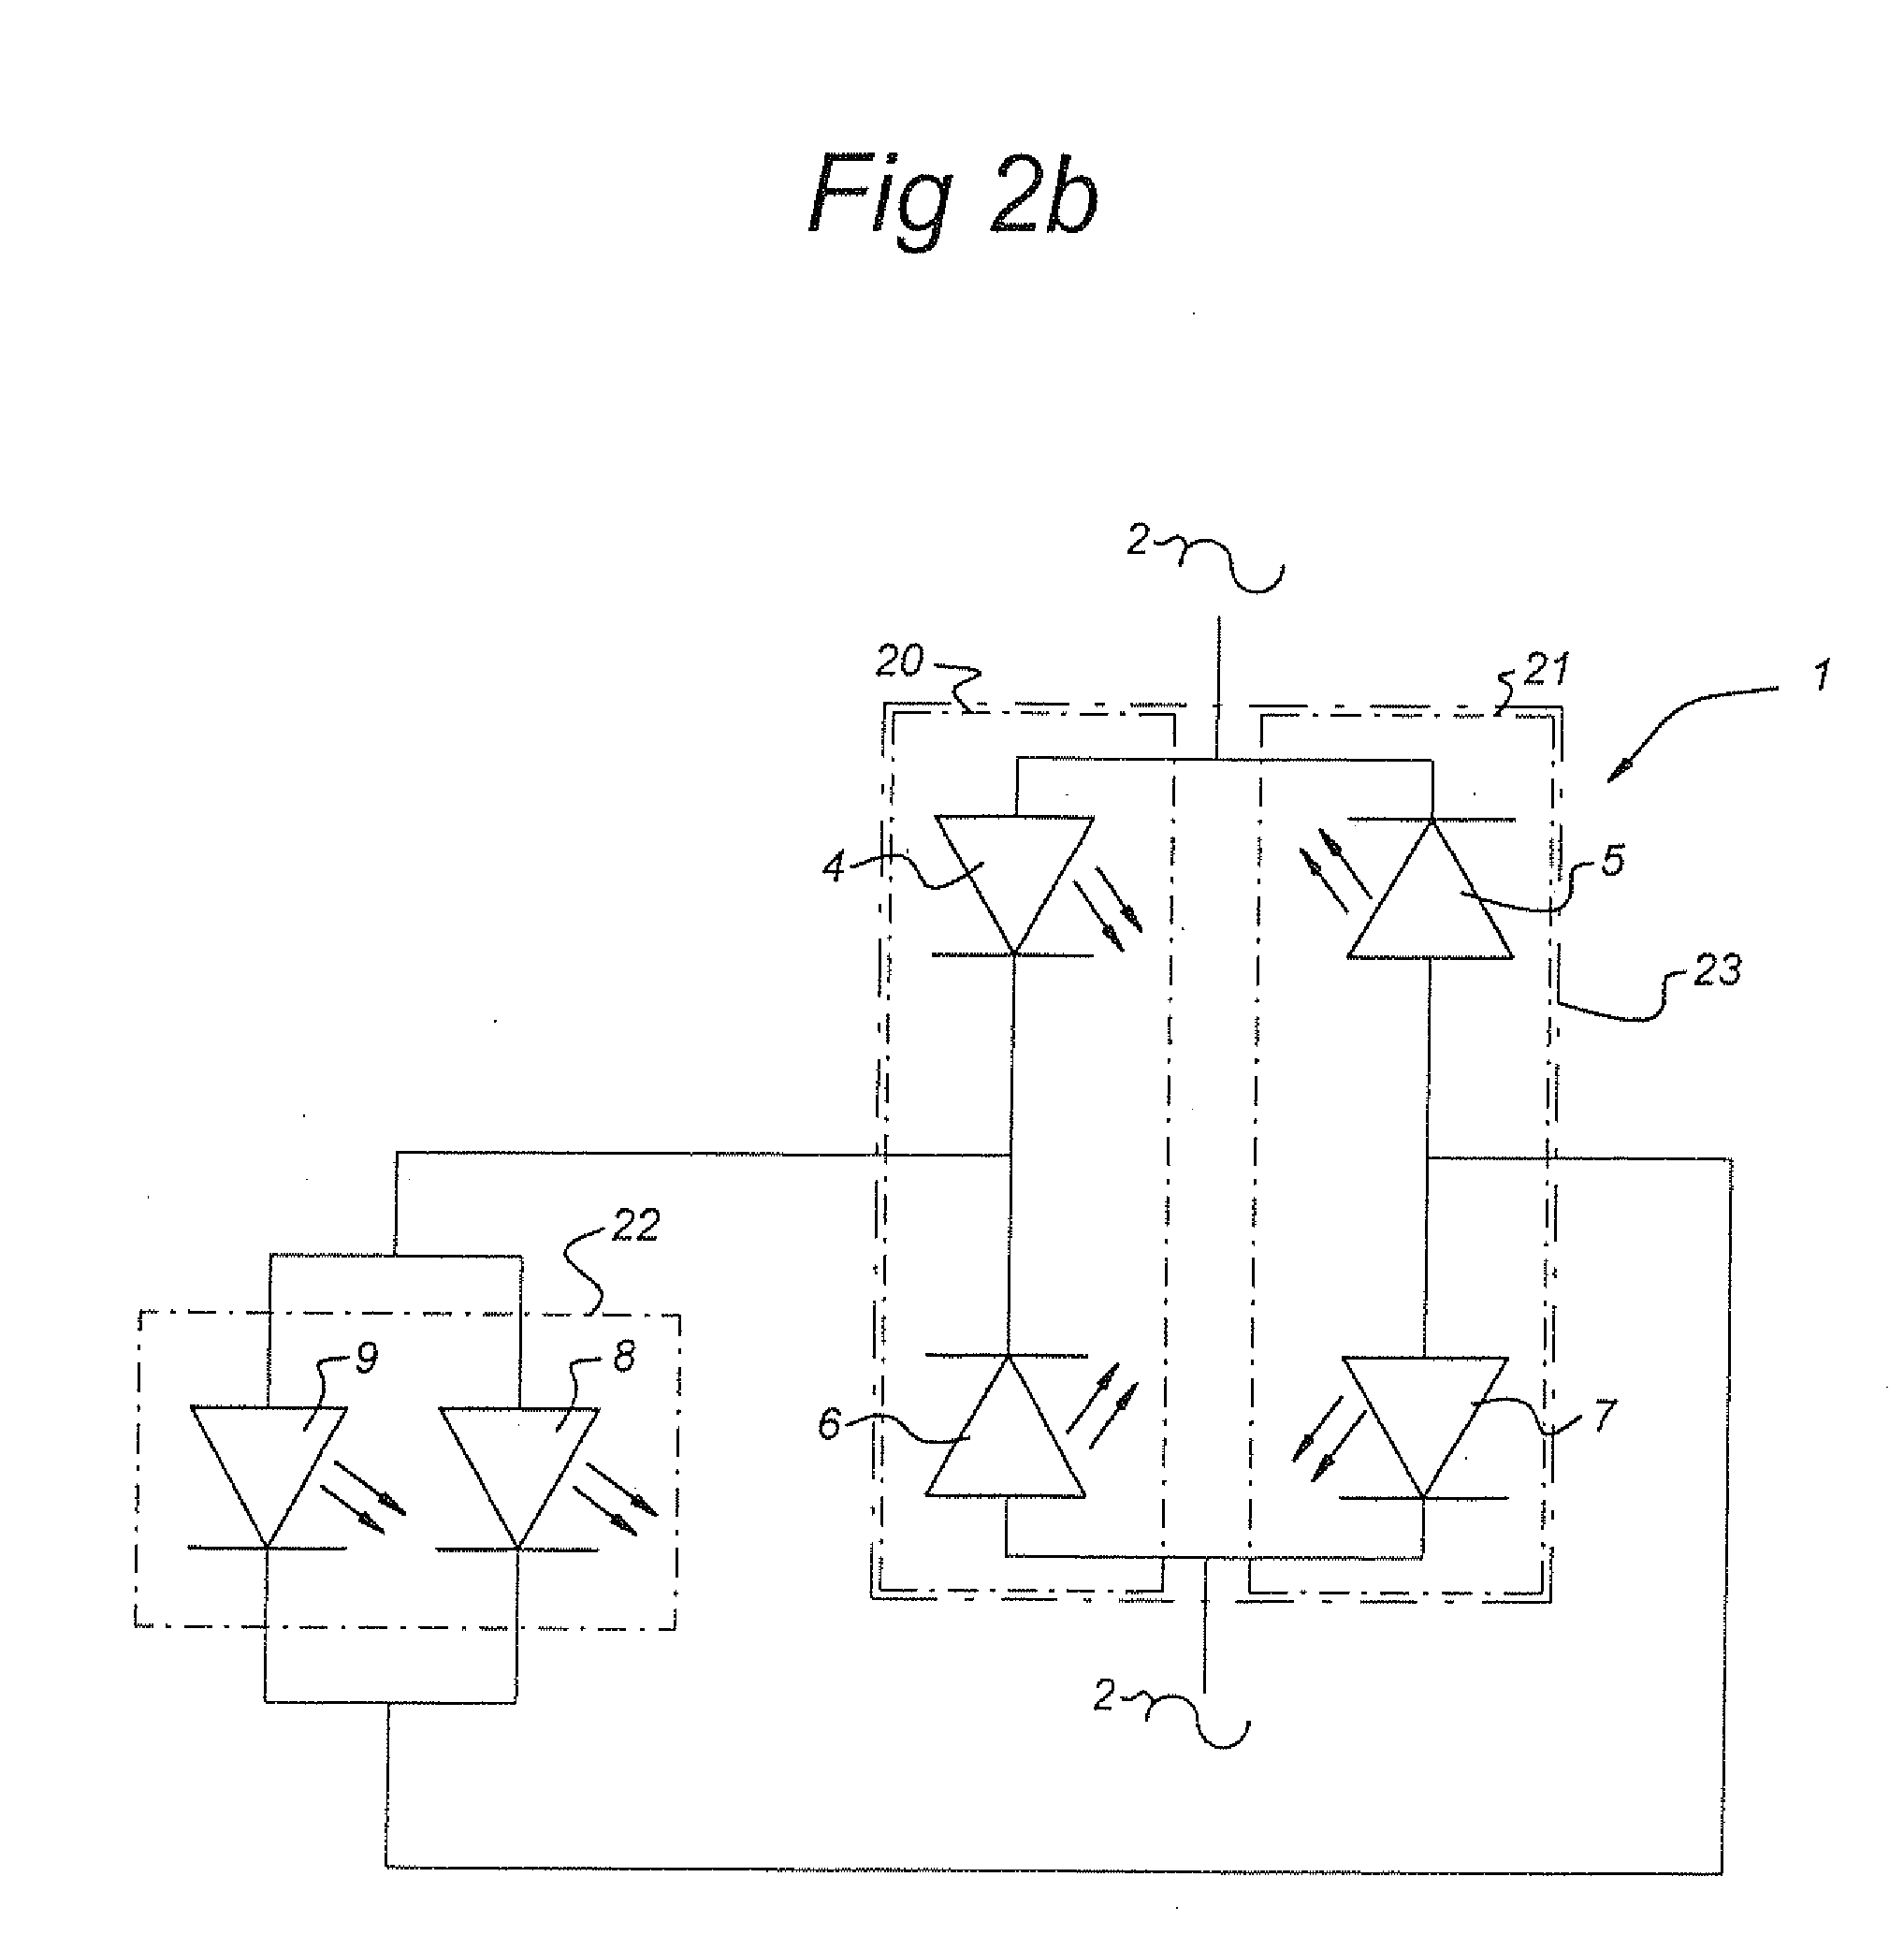 Method for Preparing an Electric Circuit Comprising Multiple Leds